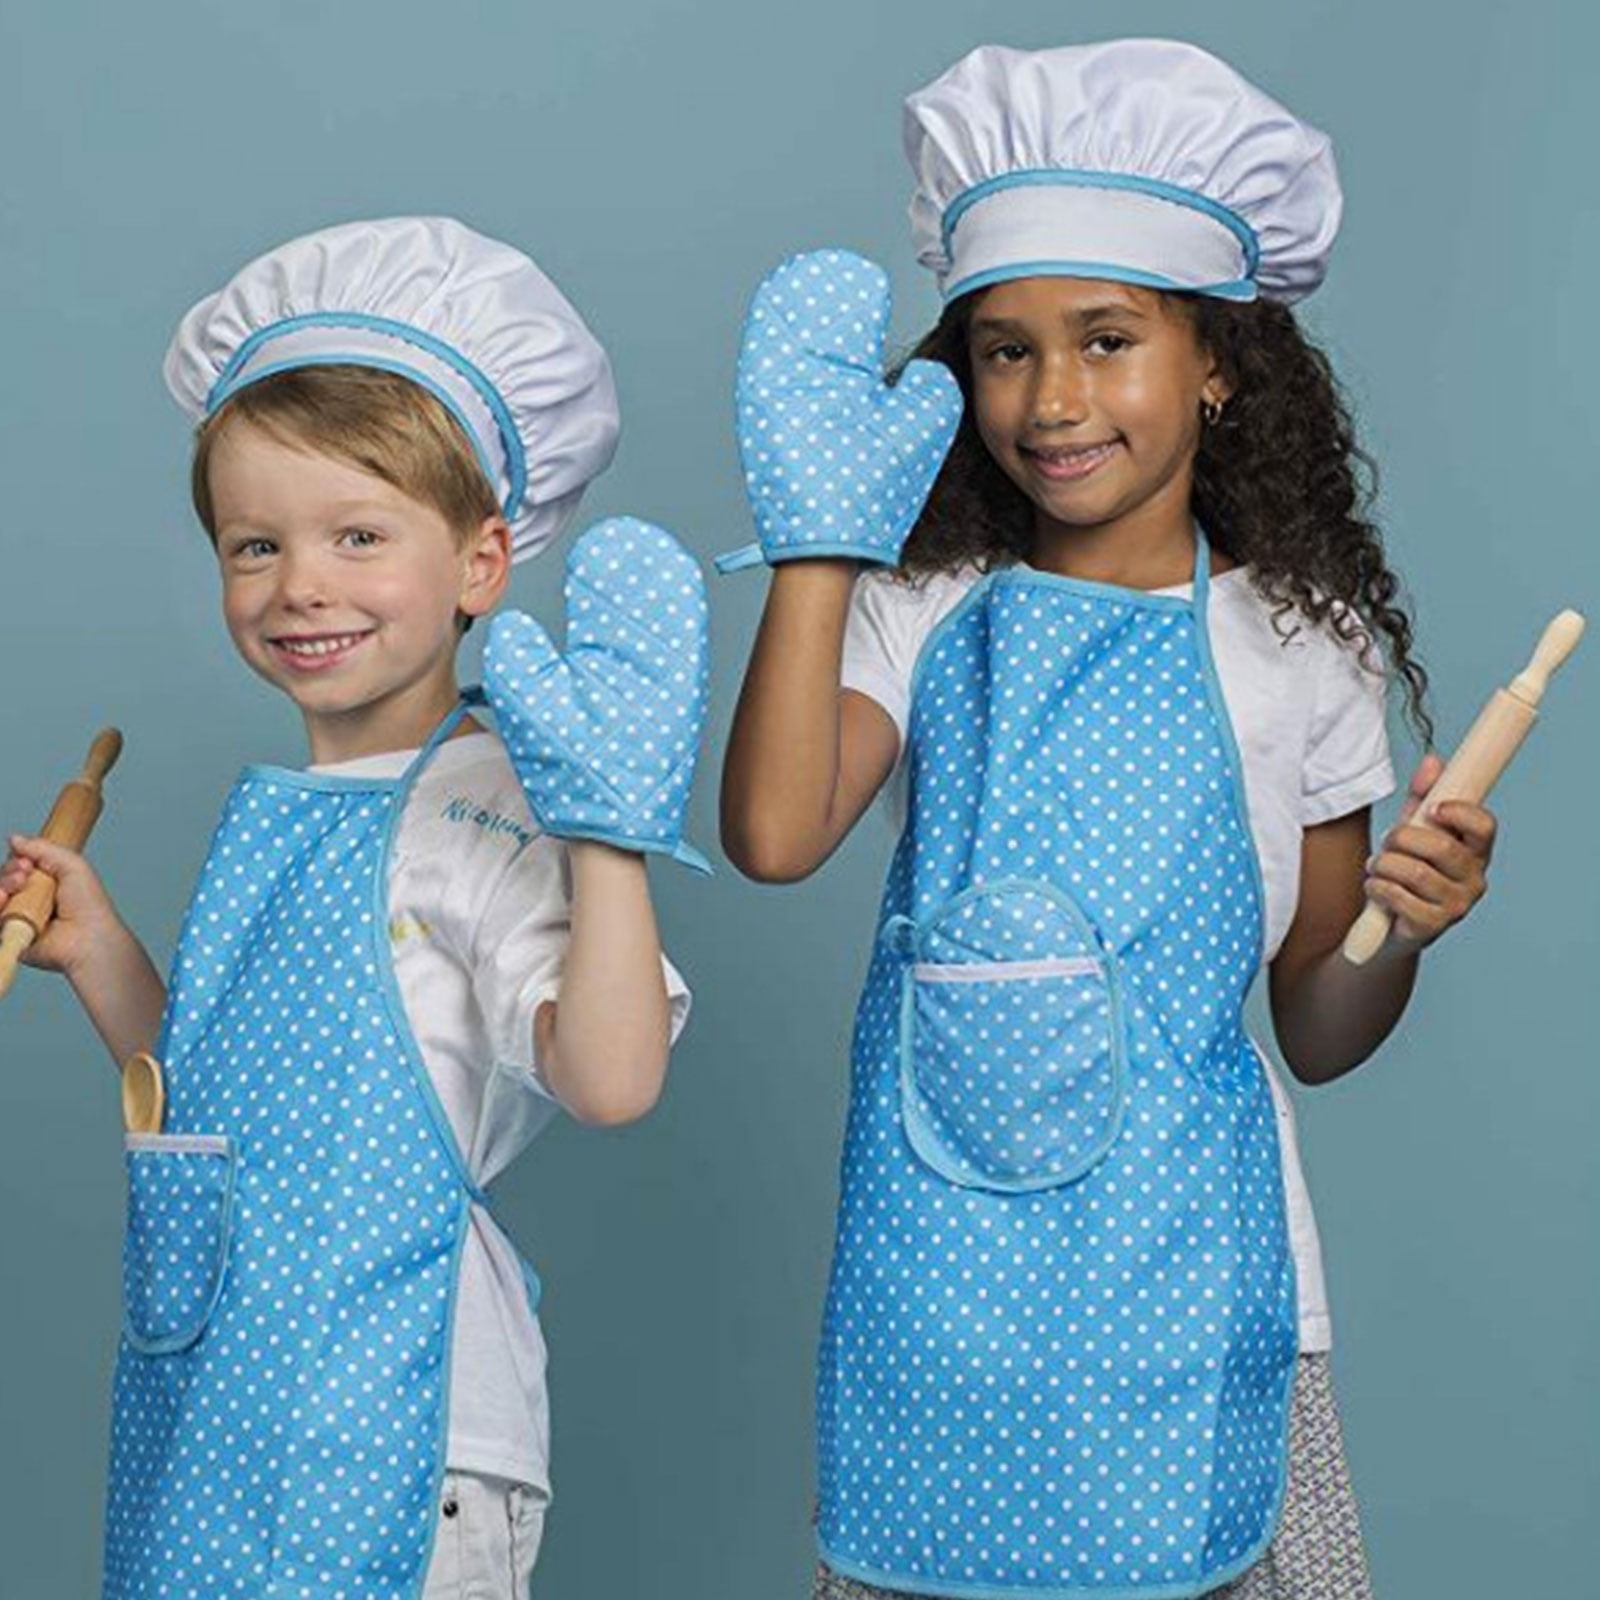 Nutrichef Kids Cooking & Baking Set Complete Set for Girls & Boys, Includes Little Chef's Apron